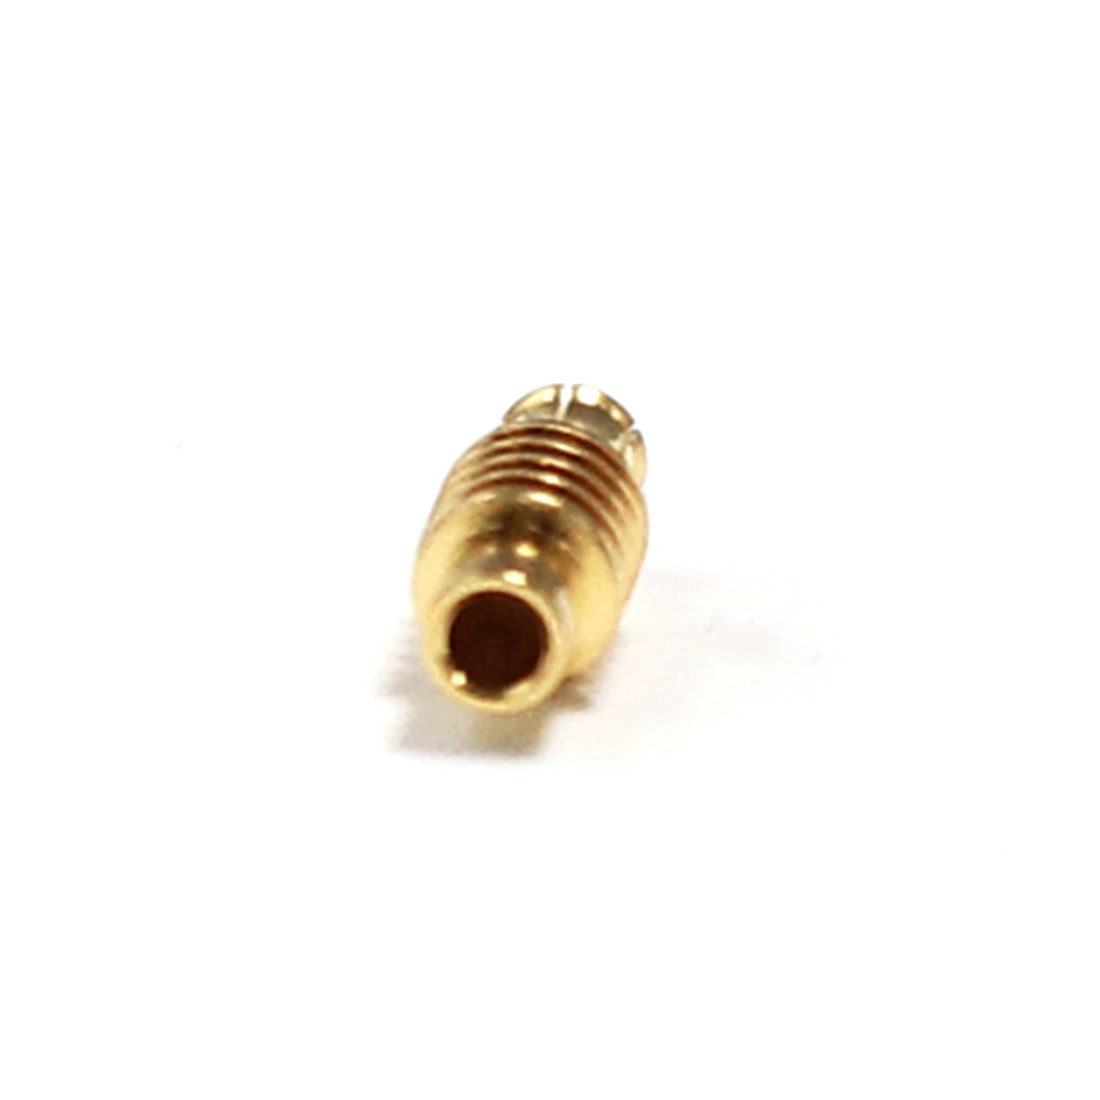 

1pc MCX Male Plug RF Coax Convertor Connector Solder for Semi-flexible Cable RG405.086" Straight Goldplated NEW Wholesale